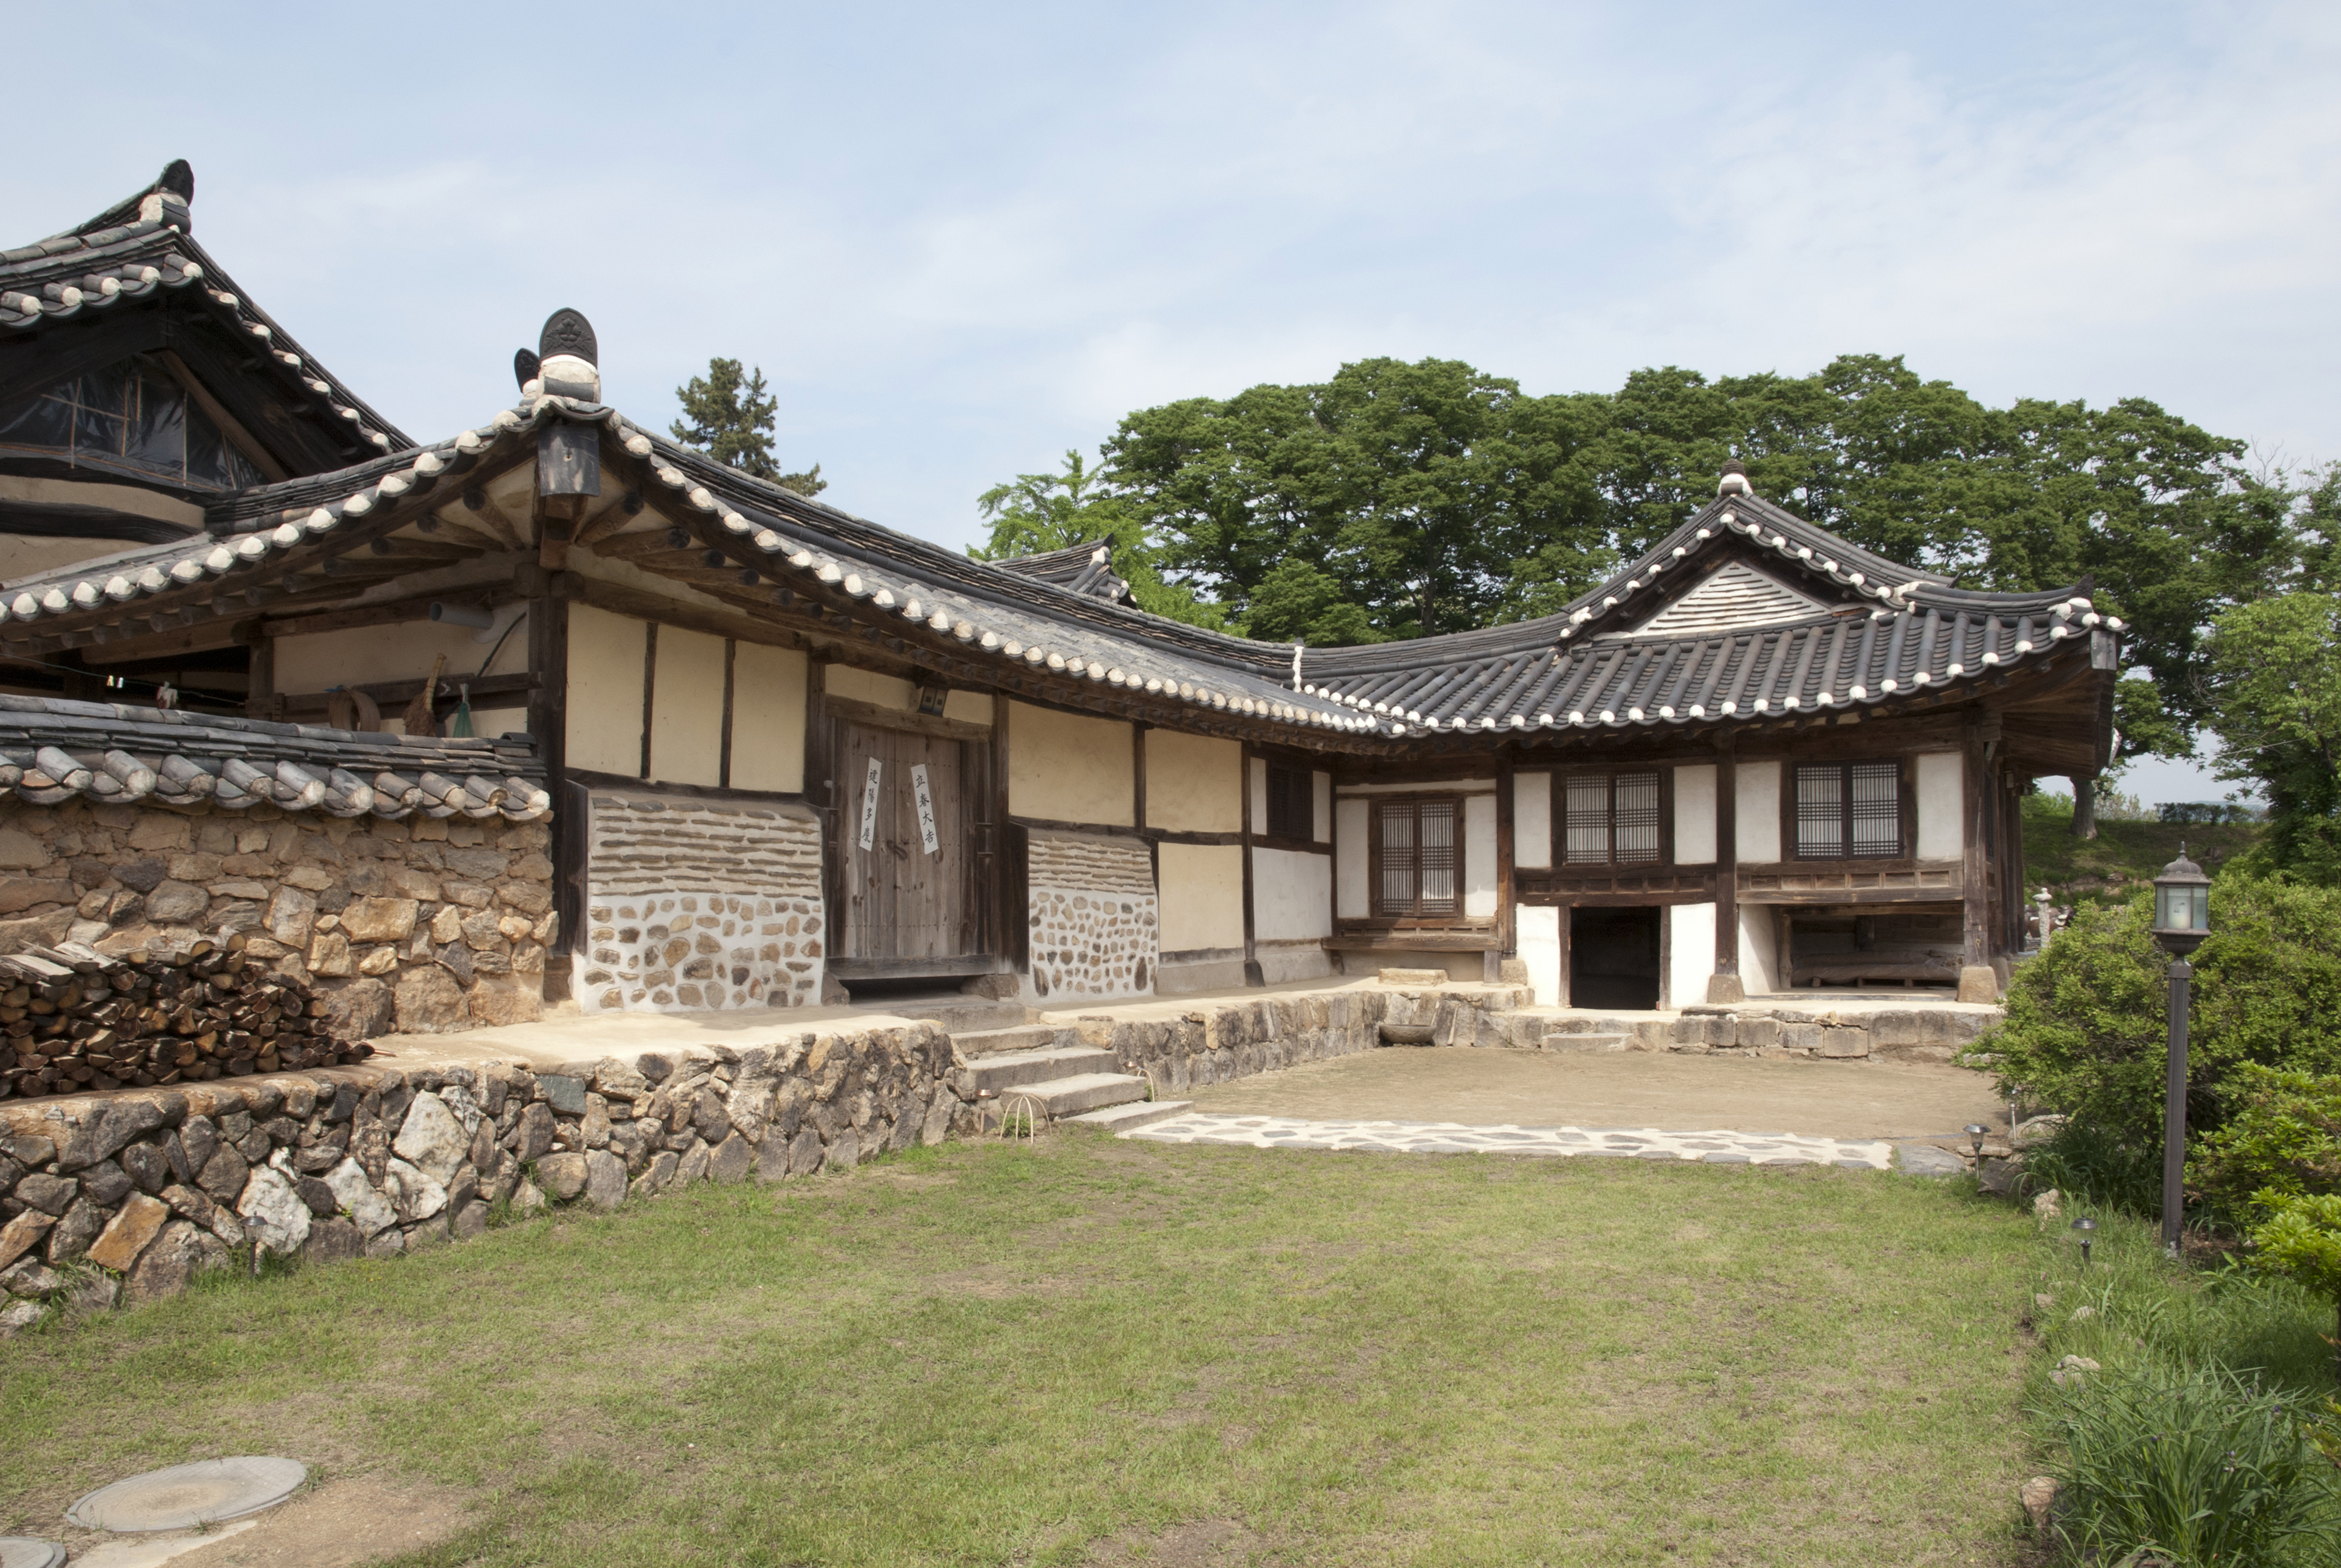 ] Exterior view of a traditional household in Korea shows the scholar’s studio on the left and the inner room on the right behind the wall. Courtesy of Young-Kyu Park, 2022